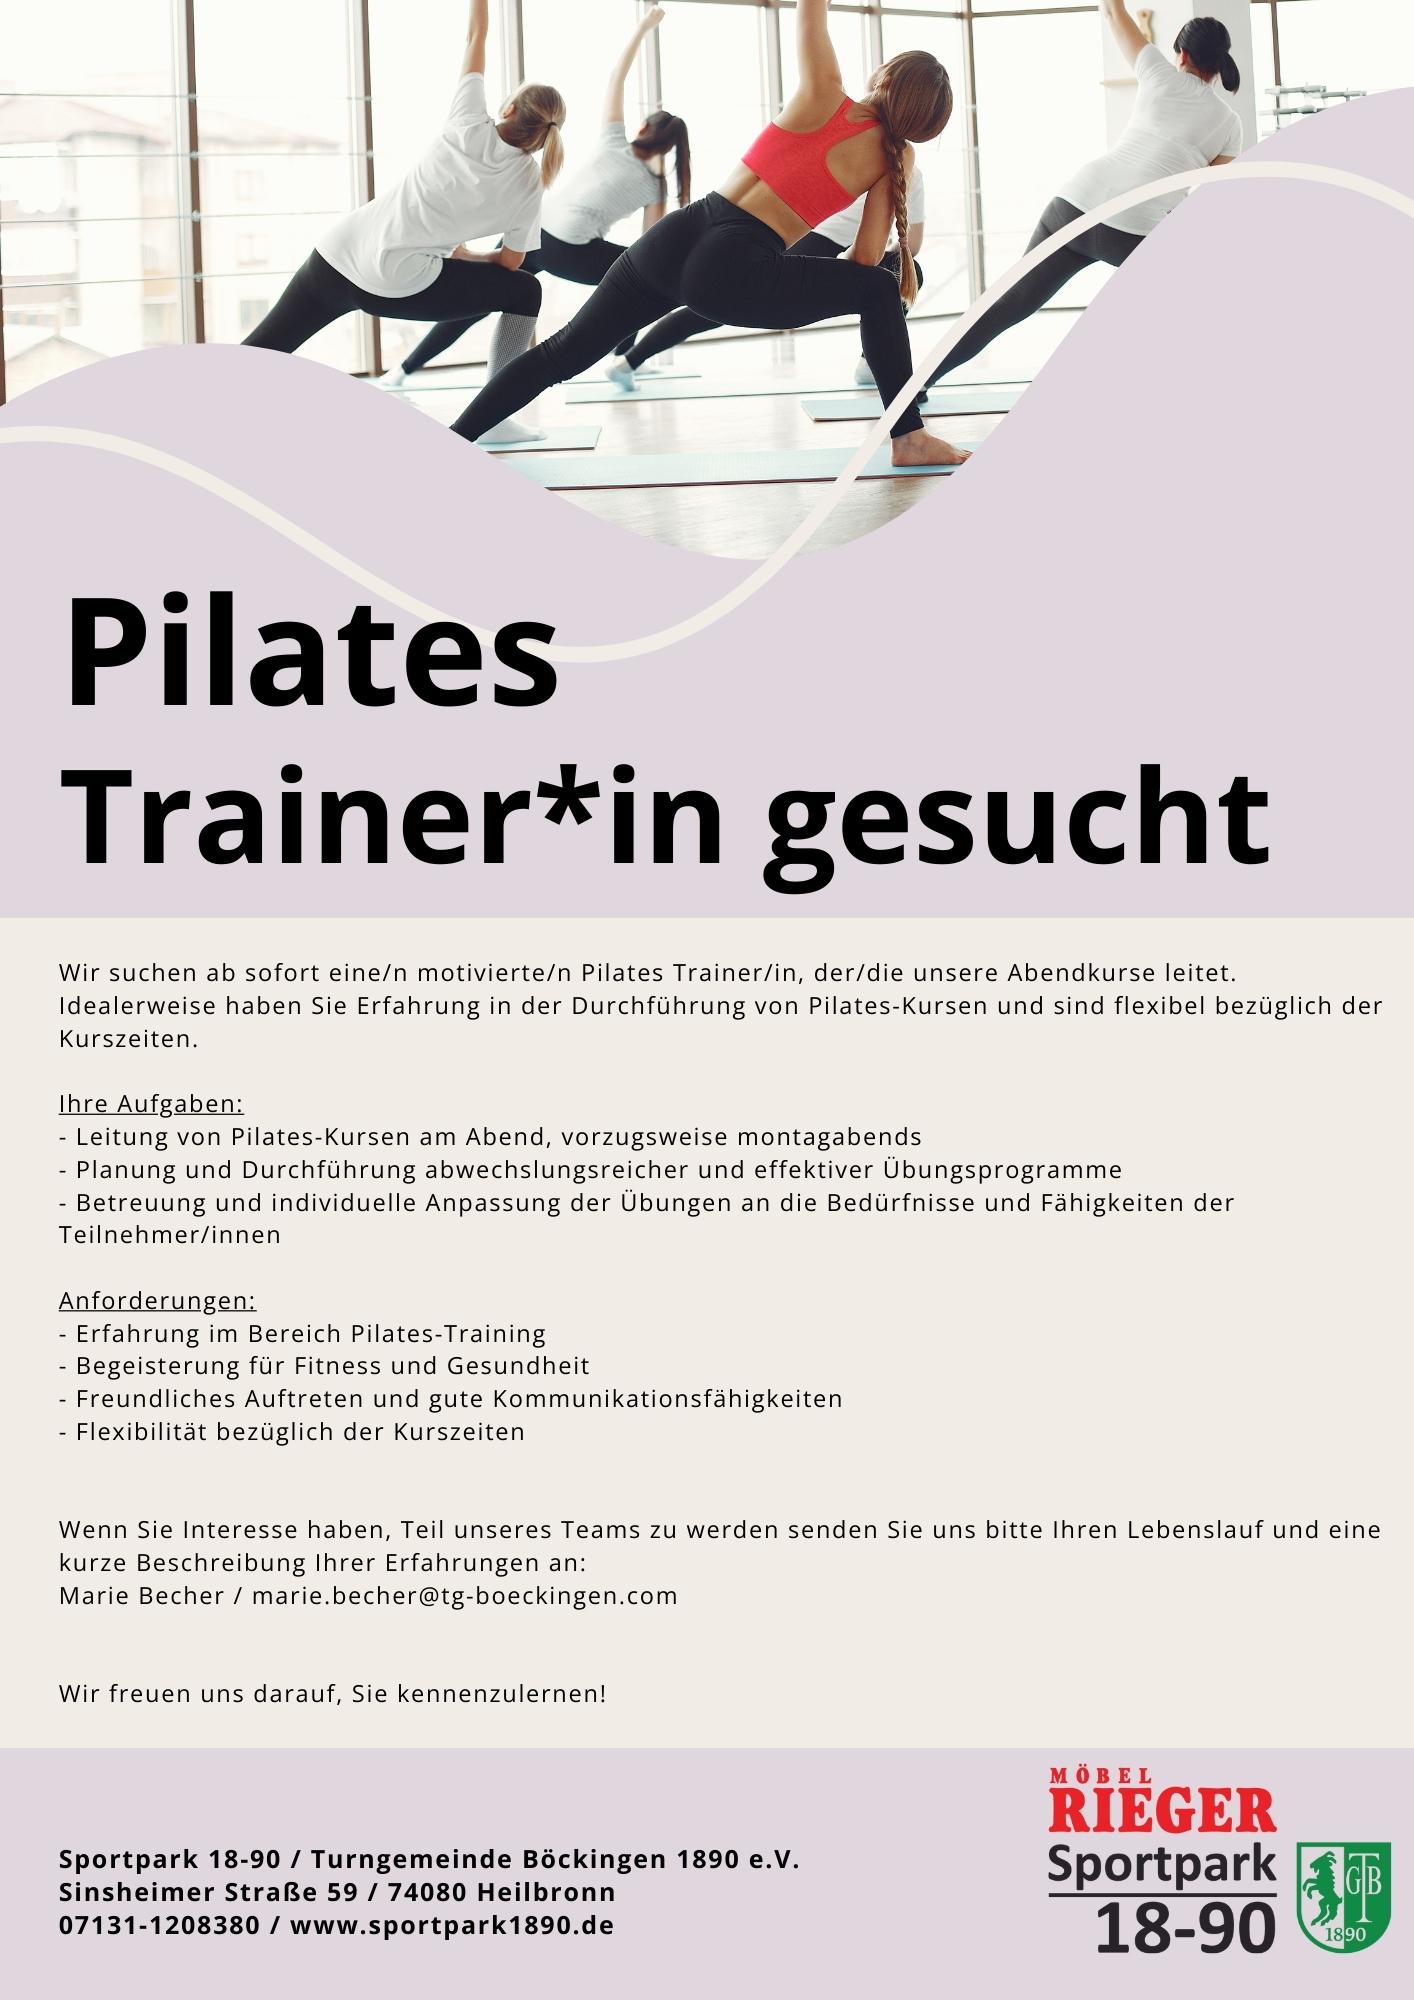 You are currently viewing Stellenangebot Pilates Trainer*in gesucht